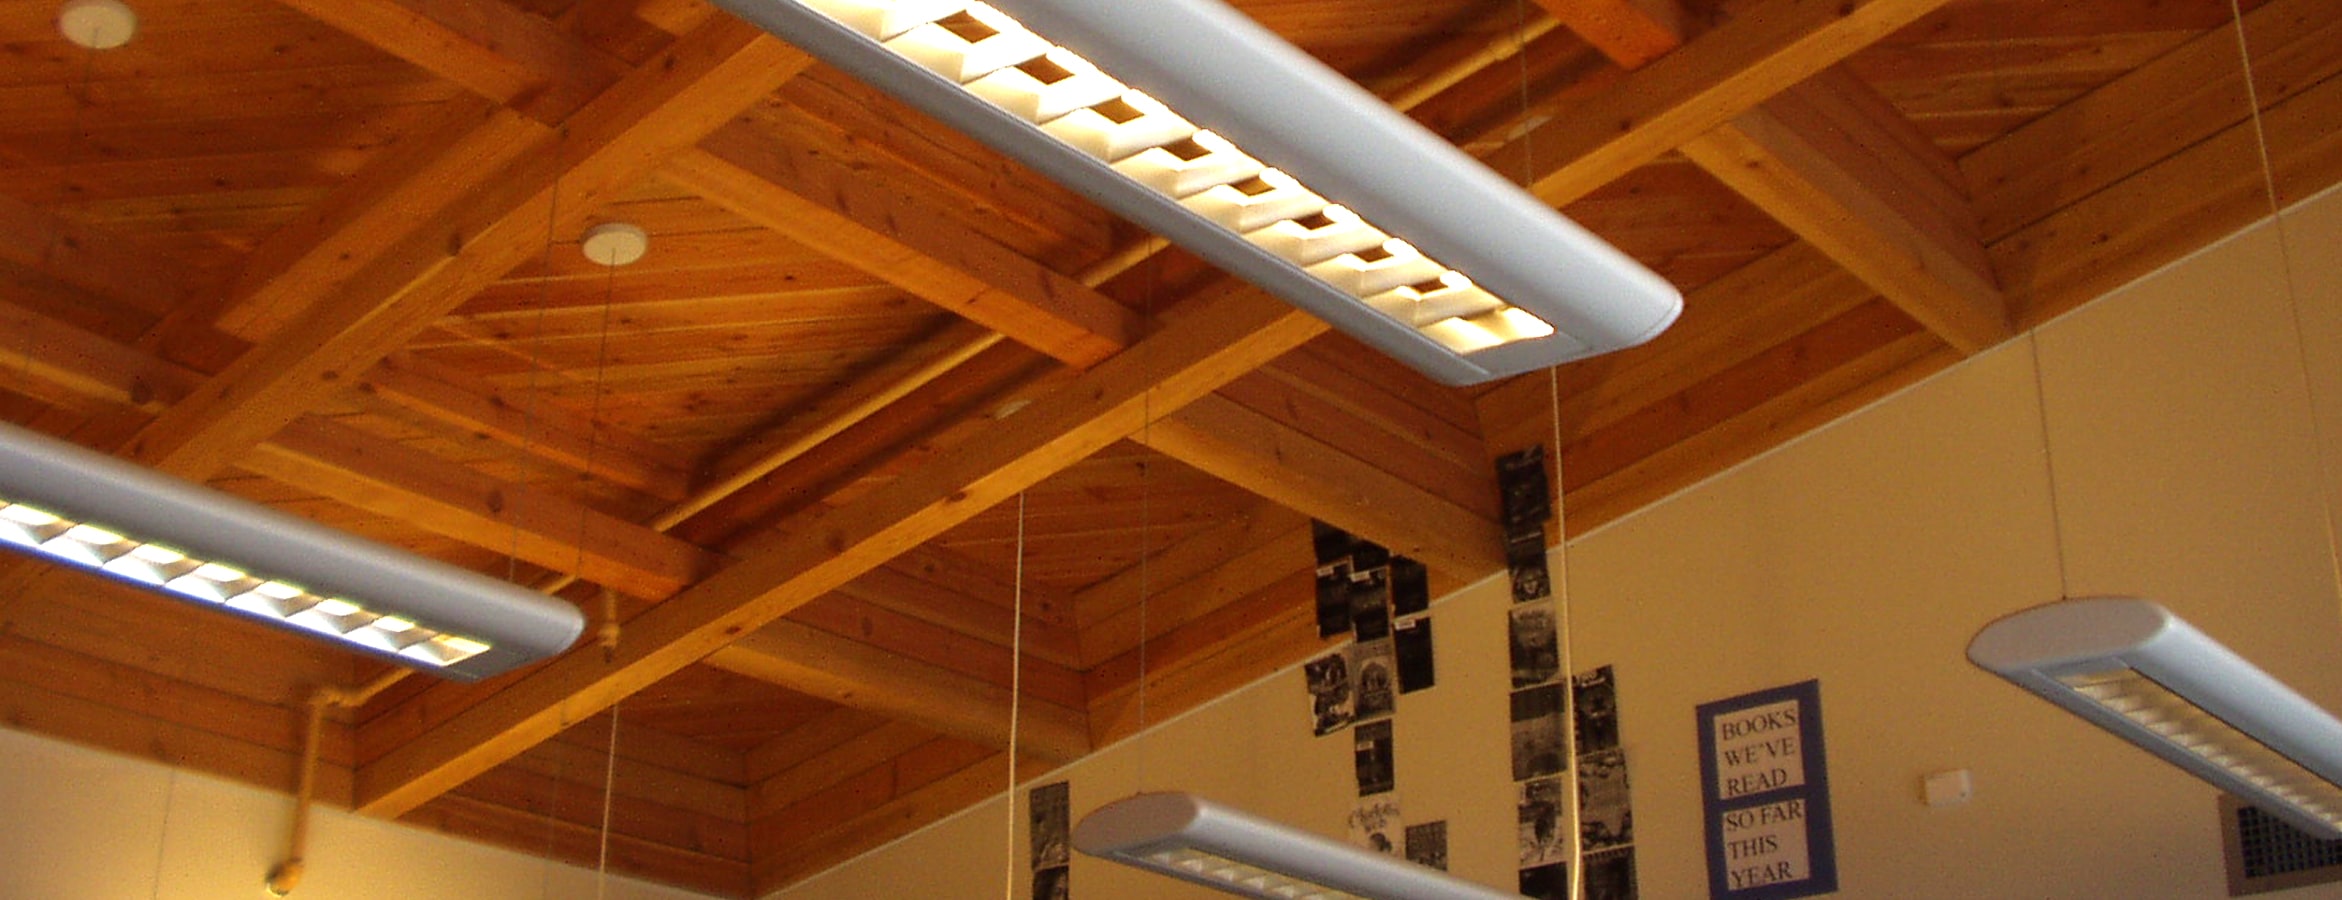 Benefits of Mass Timber Construction in Institutional Buildings